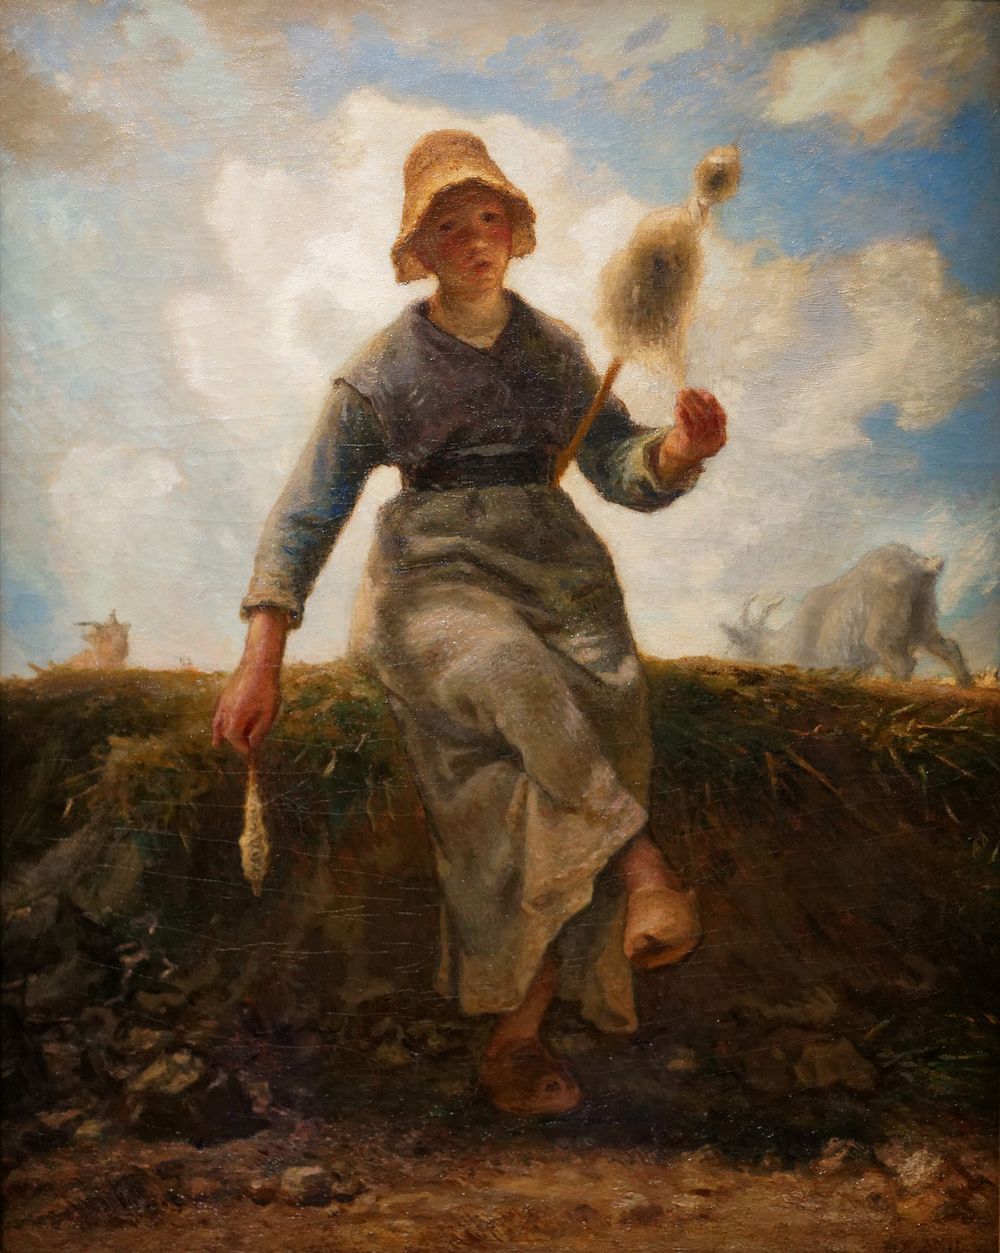 Naturalist portrait depicting a young peasant girl, spinning a length of wool by Jean-Fran&ccedil;ois Millet